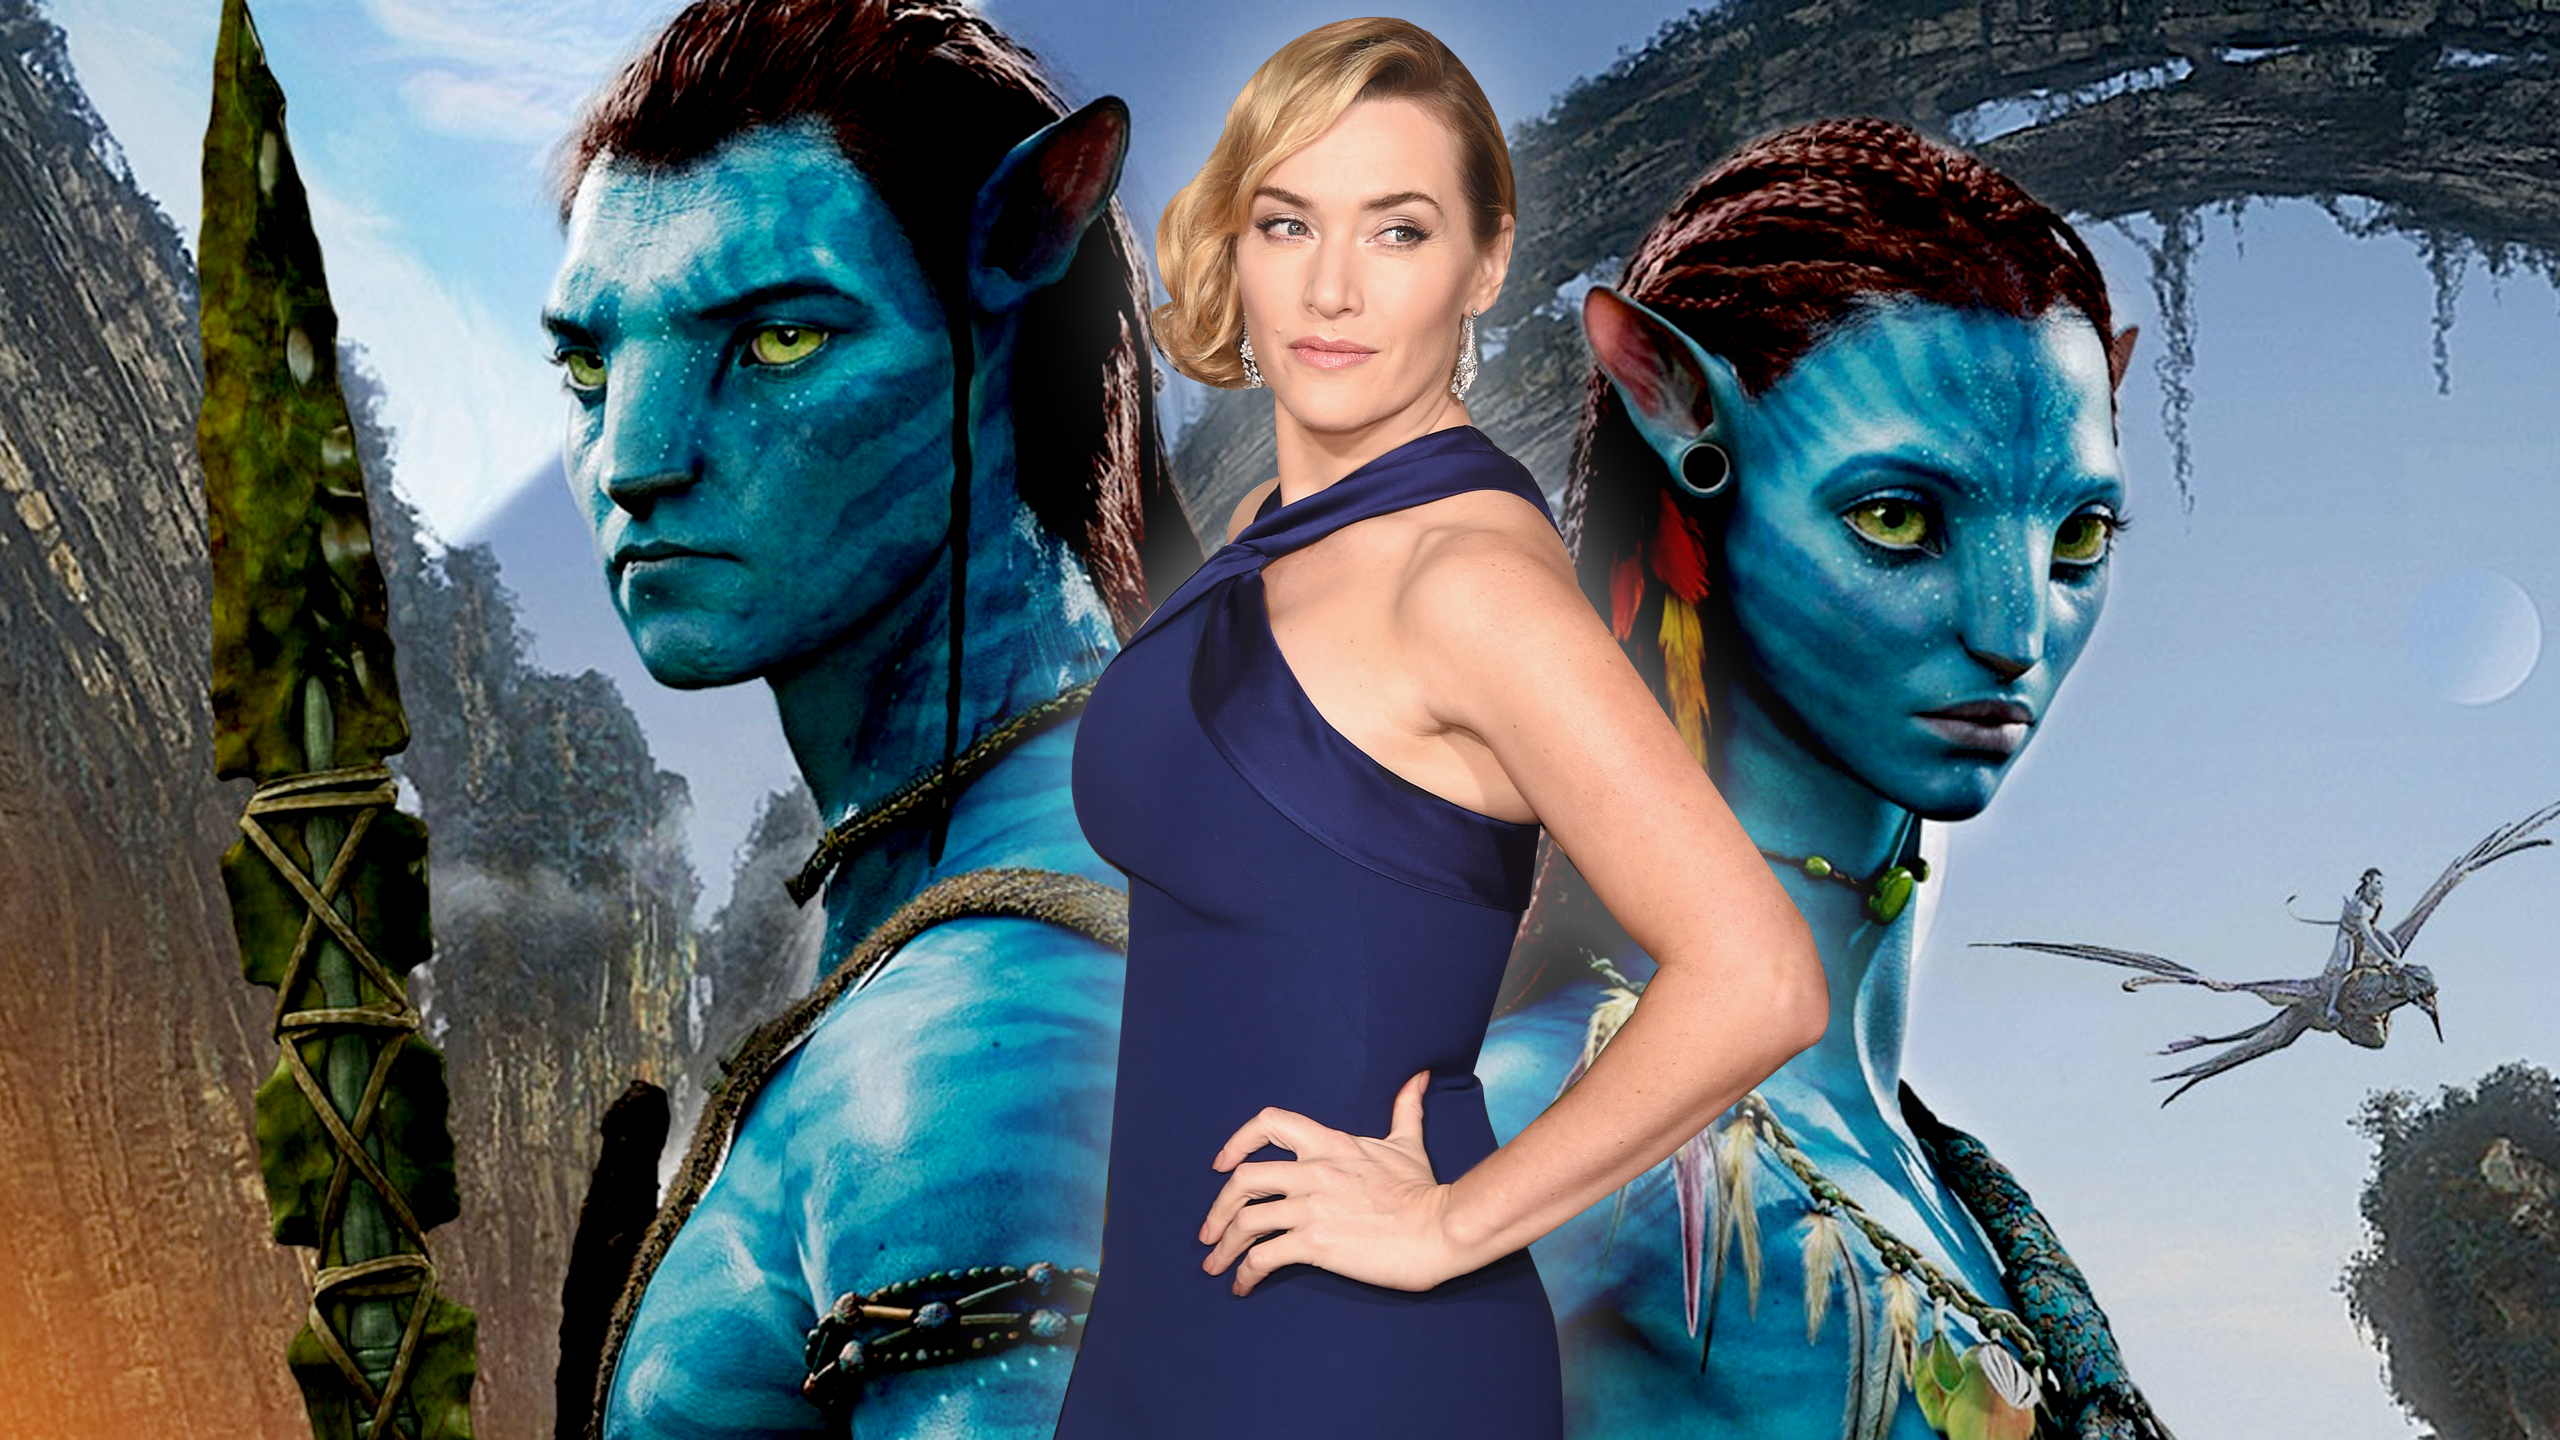 Avatar 2 release date and cast